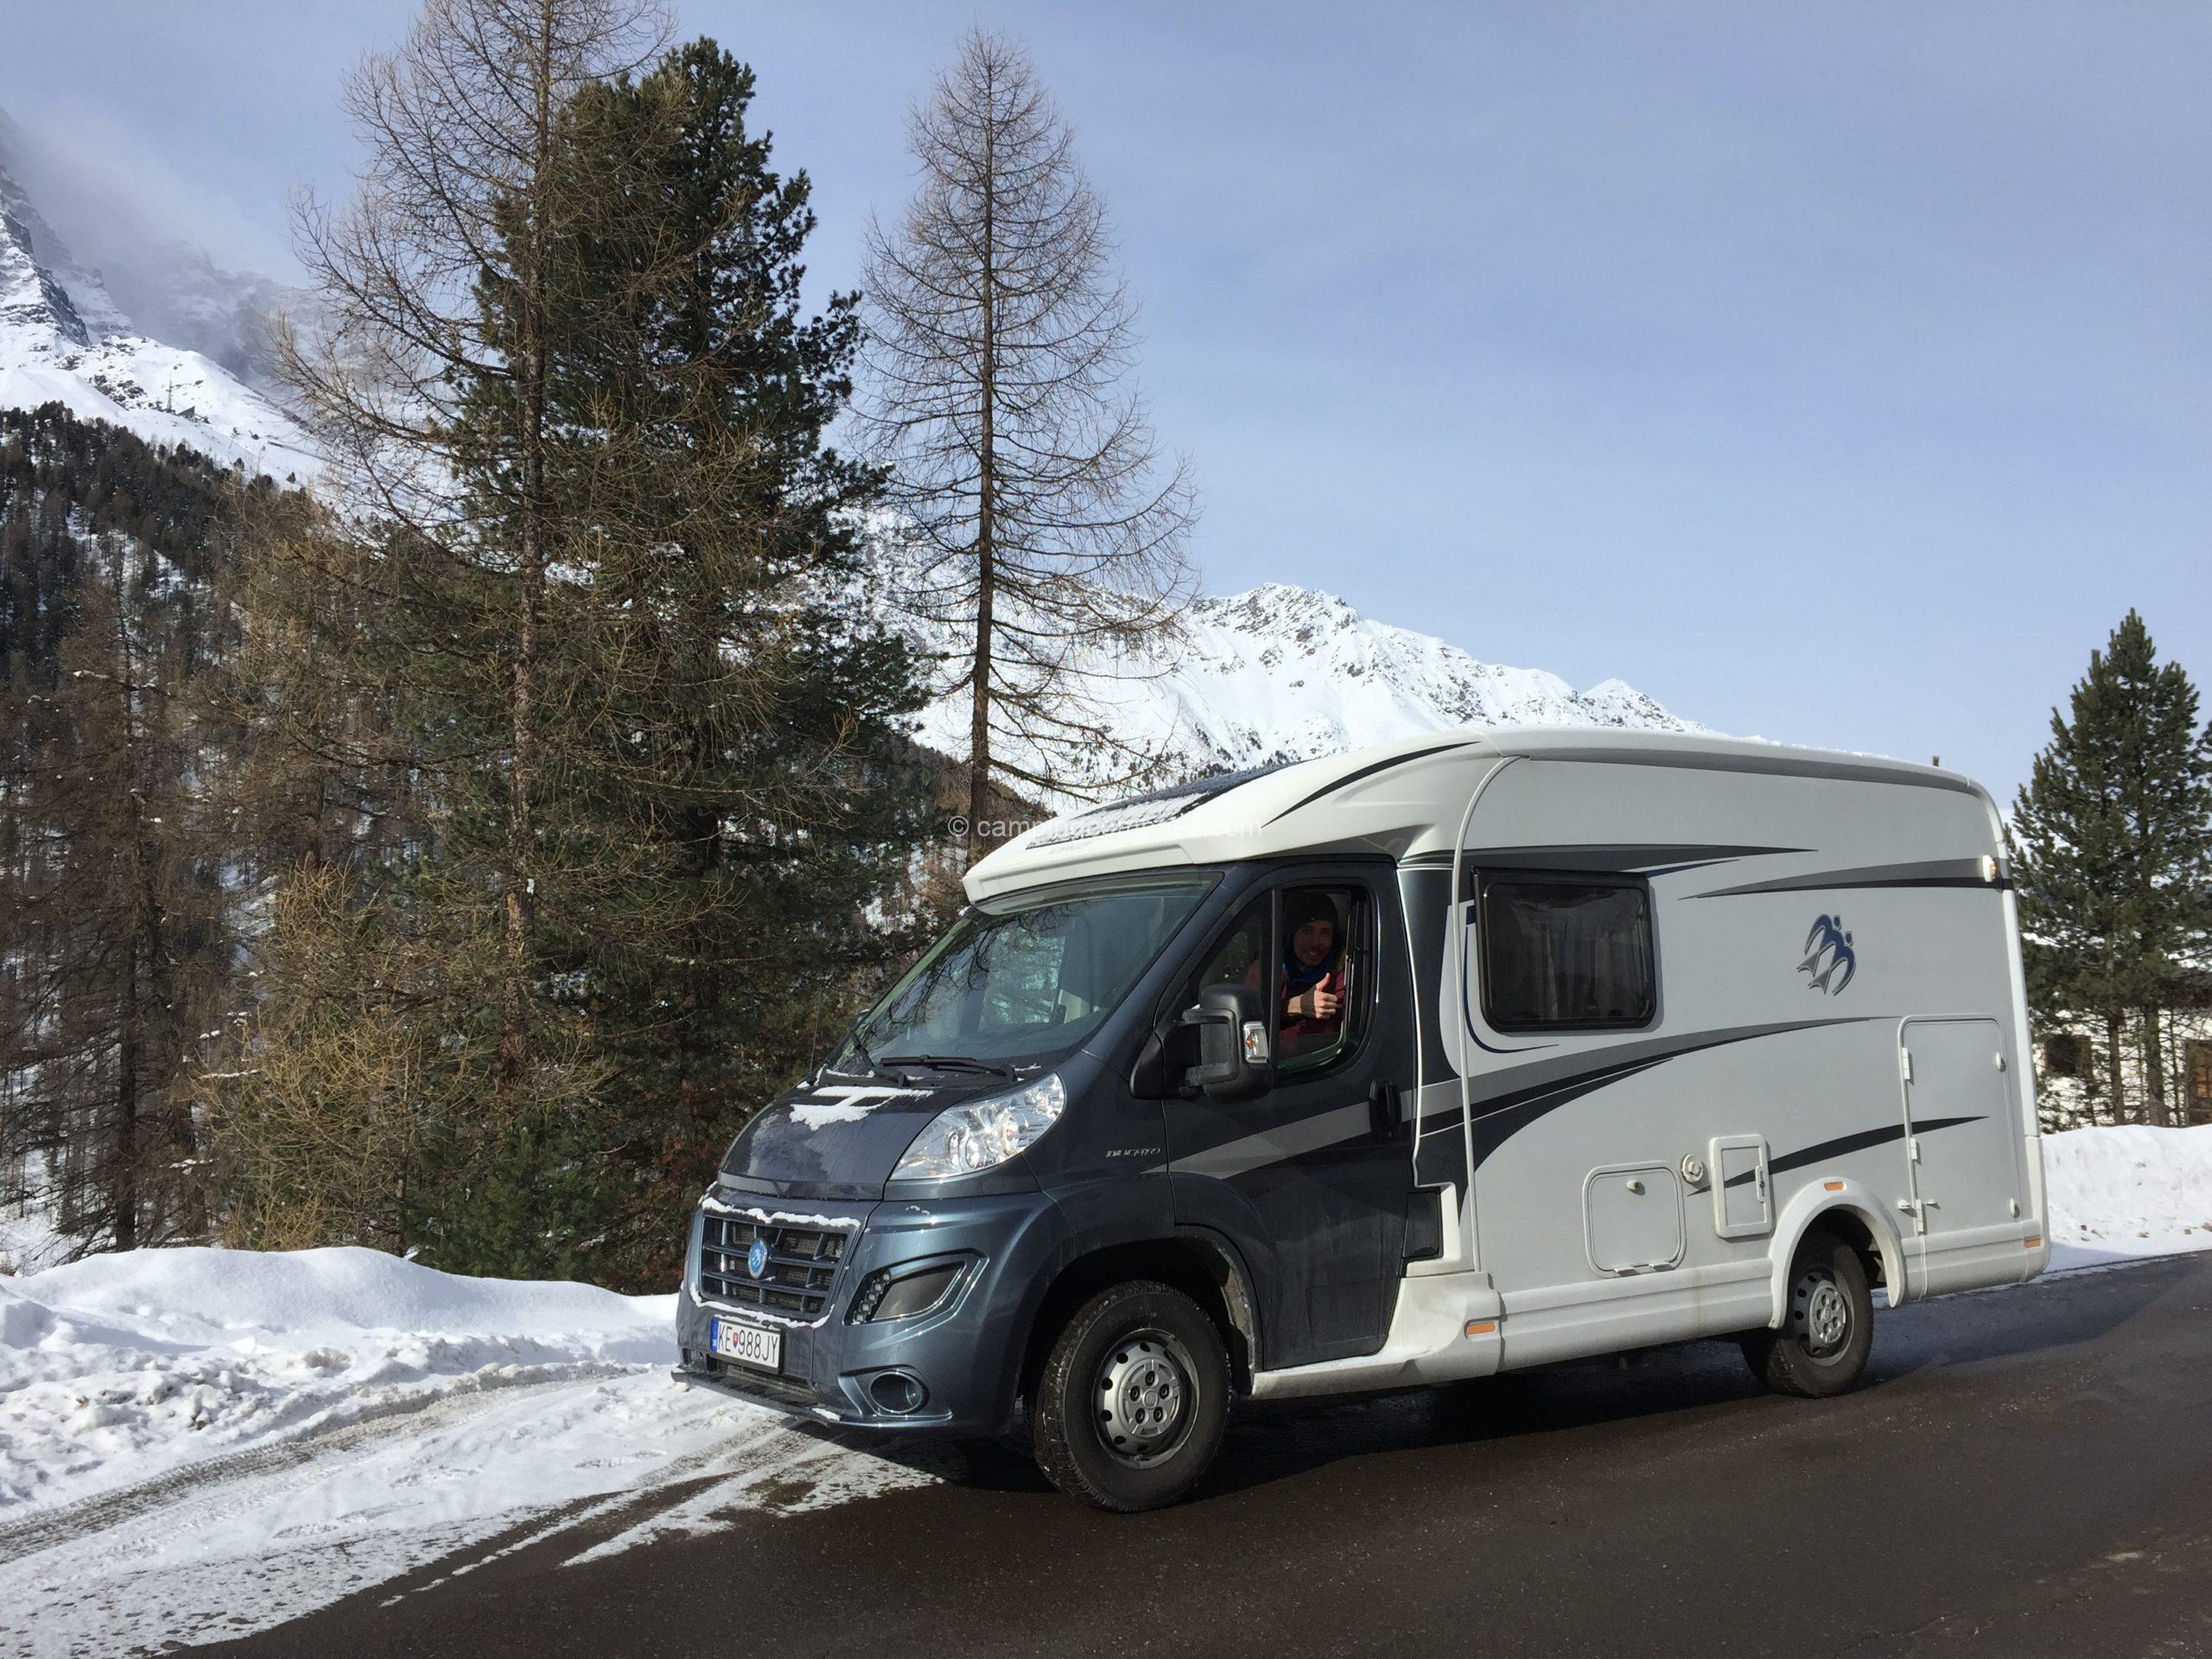 What does such a motorhome holiday look like?